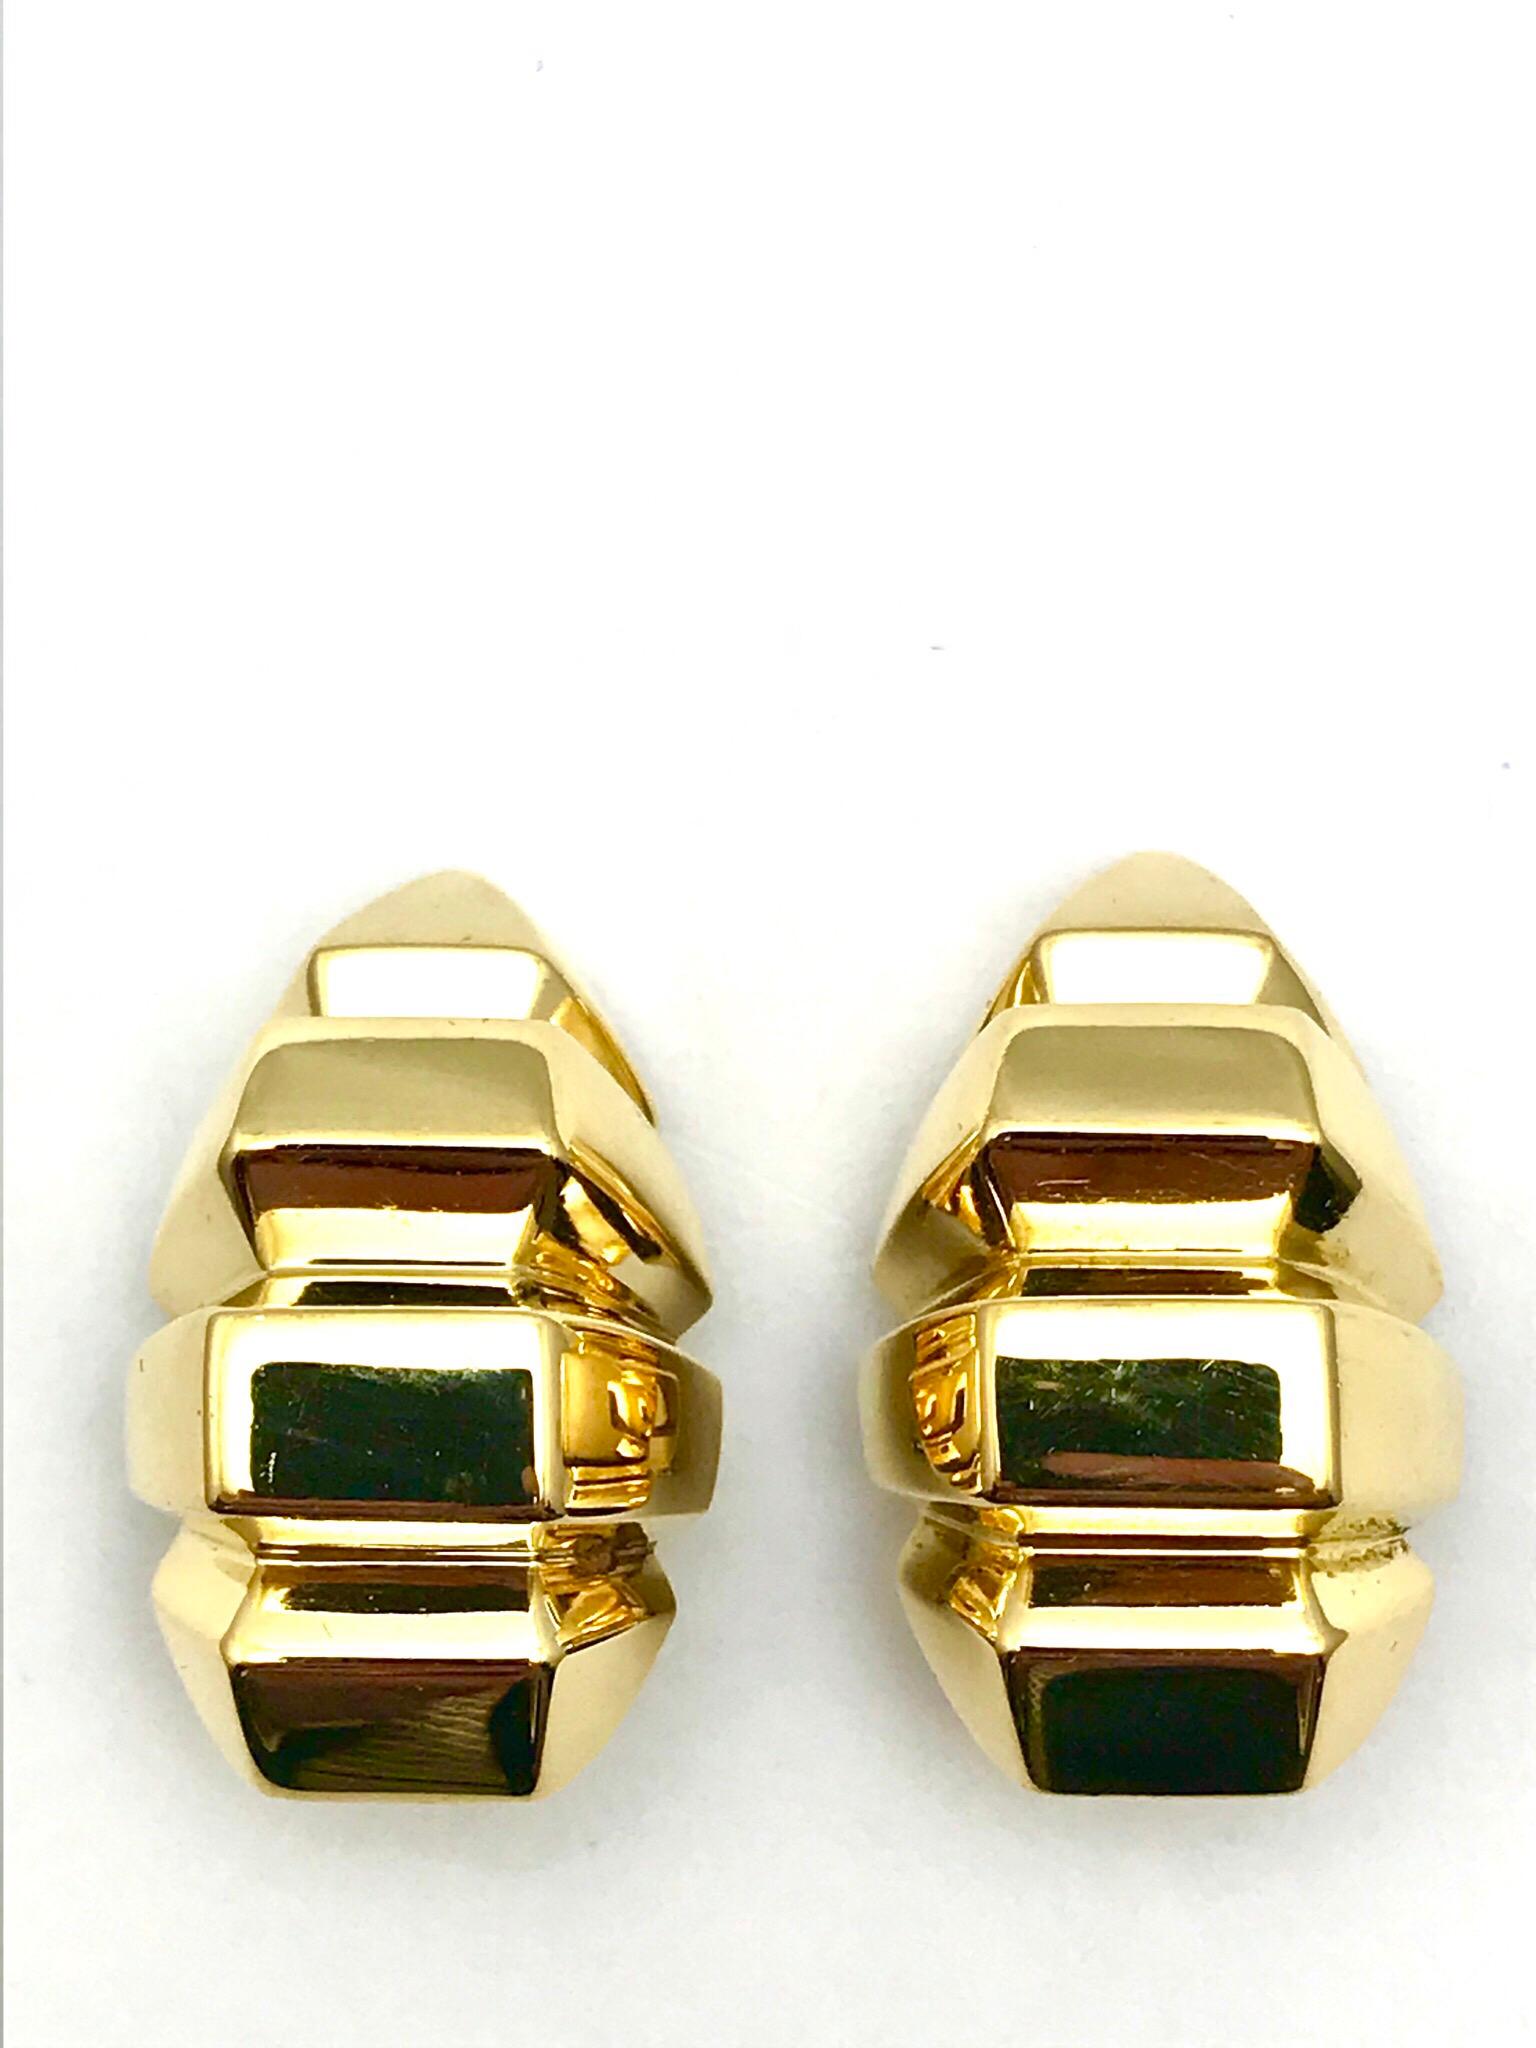 A pair of 18 karat yellow gold geometric shape  clip-on earrings.  Designed in a squared off rib like structure, the earrings feature an omega clip back.  (Posts can be added)

Hallmark:  18K